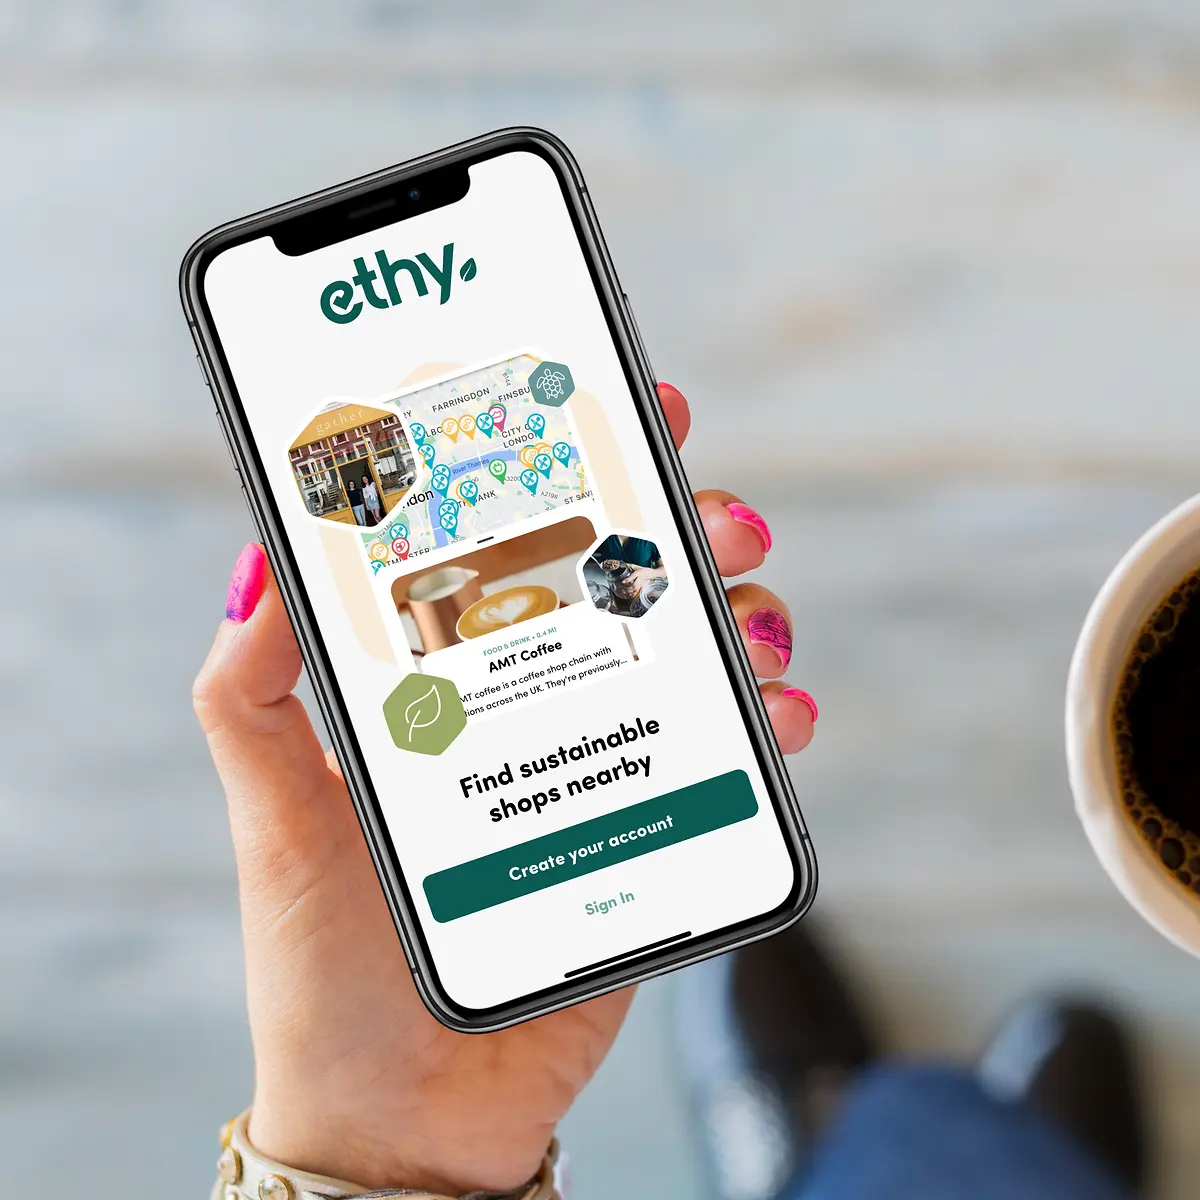 ethy, the UK organisation championing sustainable shopping, connects savvy shoppers with verified environmentally and socially conscious brands.